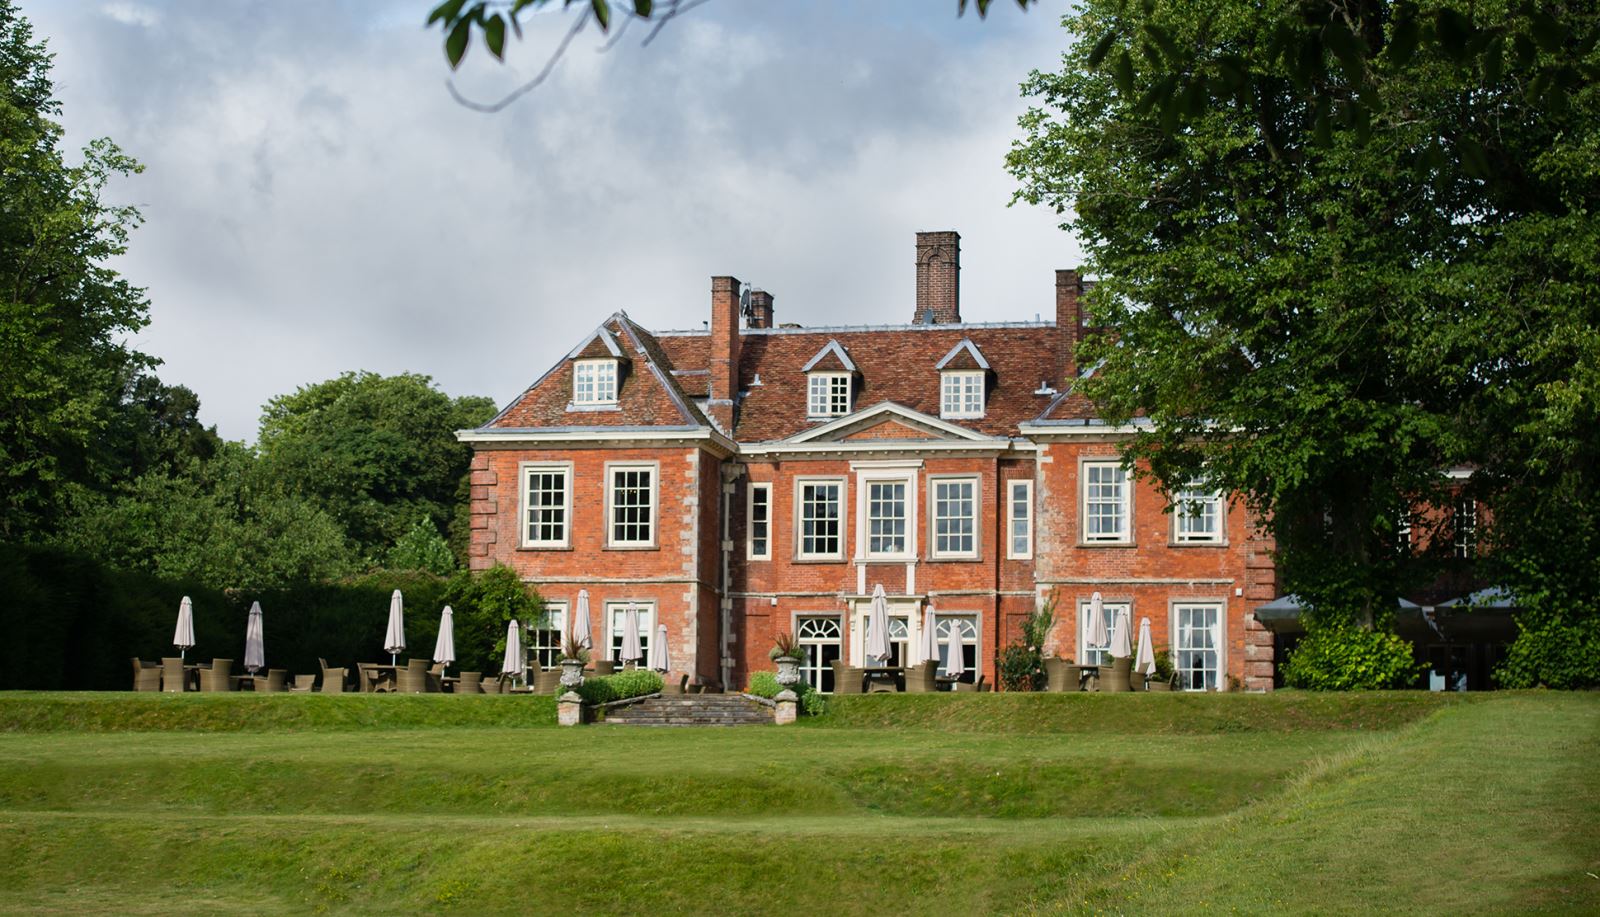 Lainston House on the outskirts of the city of Winchester